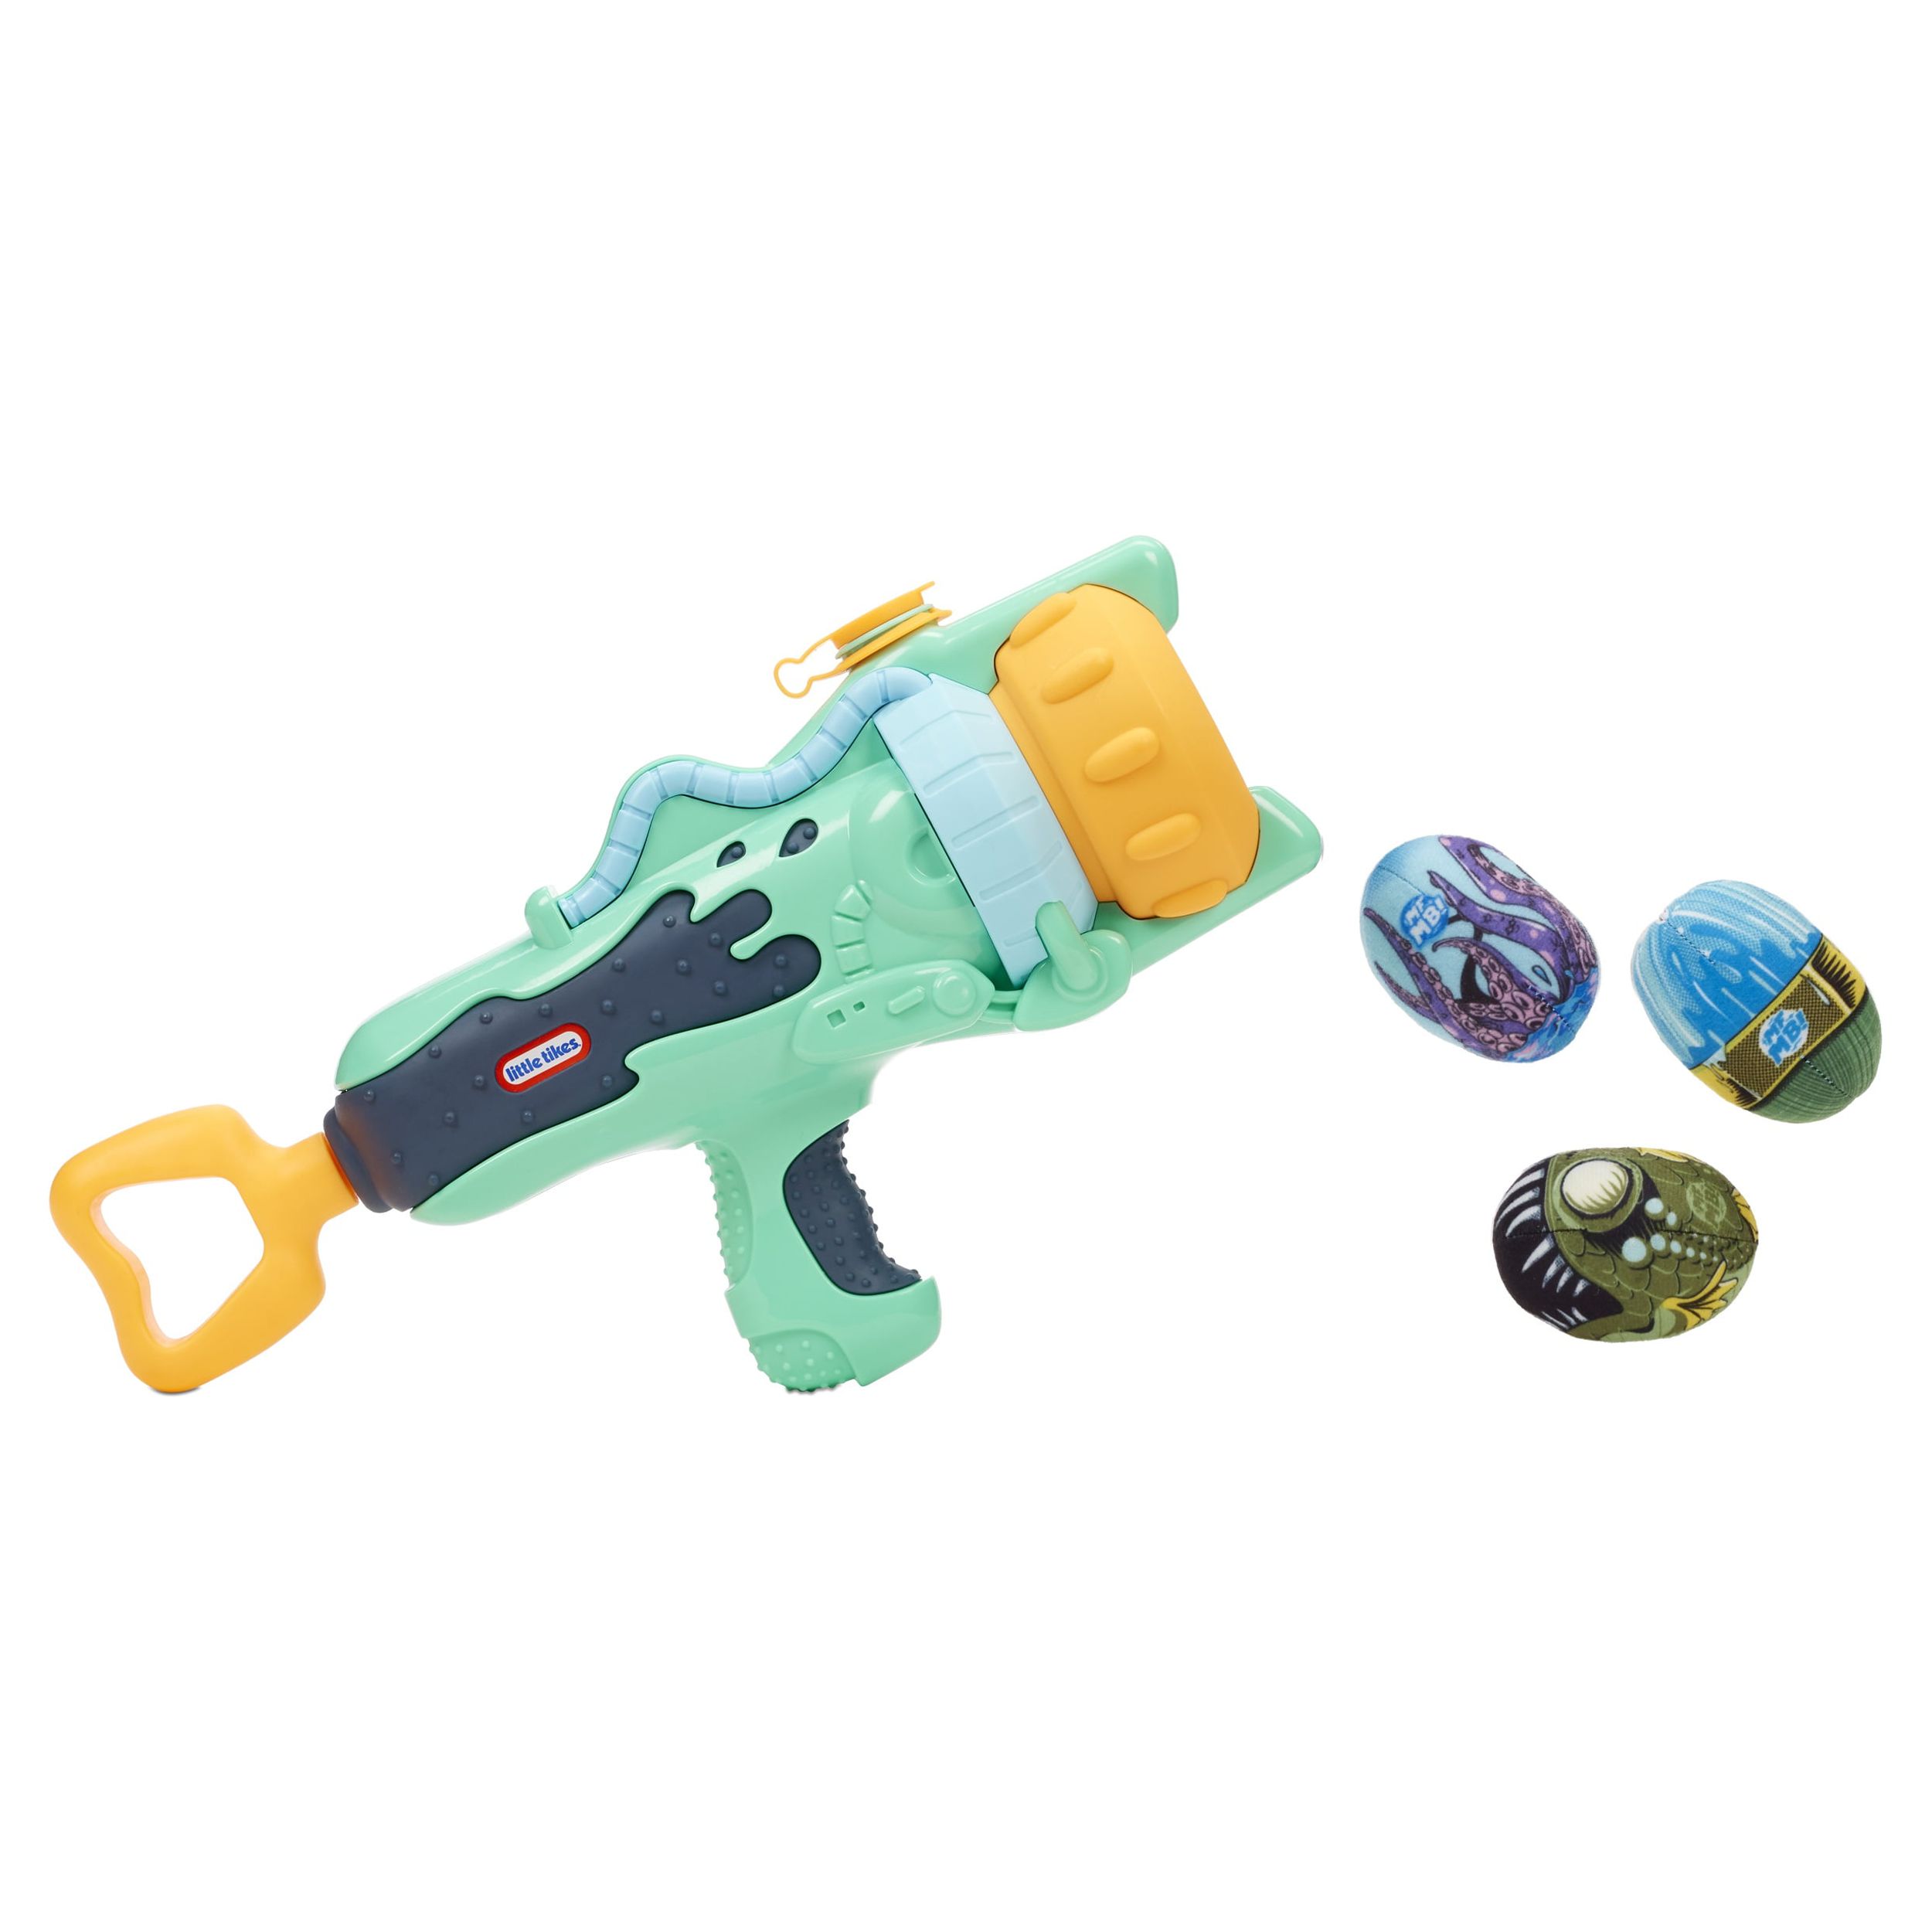 Little Tikes My First Mighty Blaster Spray Blaster, w/ 3 Power Pod Soft Pieces, 12' Range- Gift for Kids Toddlers Boys Girls Ages 3 4 5+ Year Old - image 1 of 7